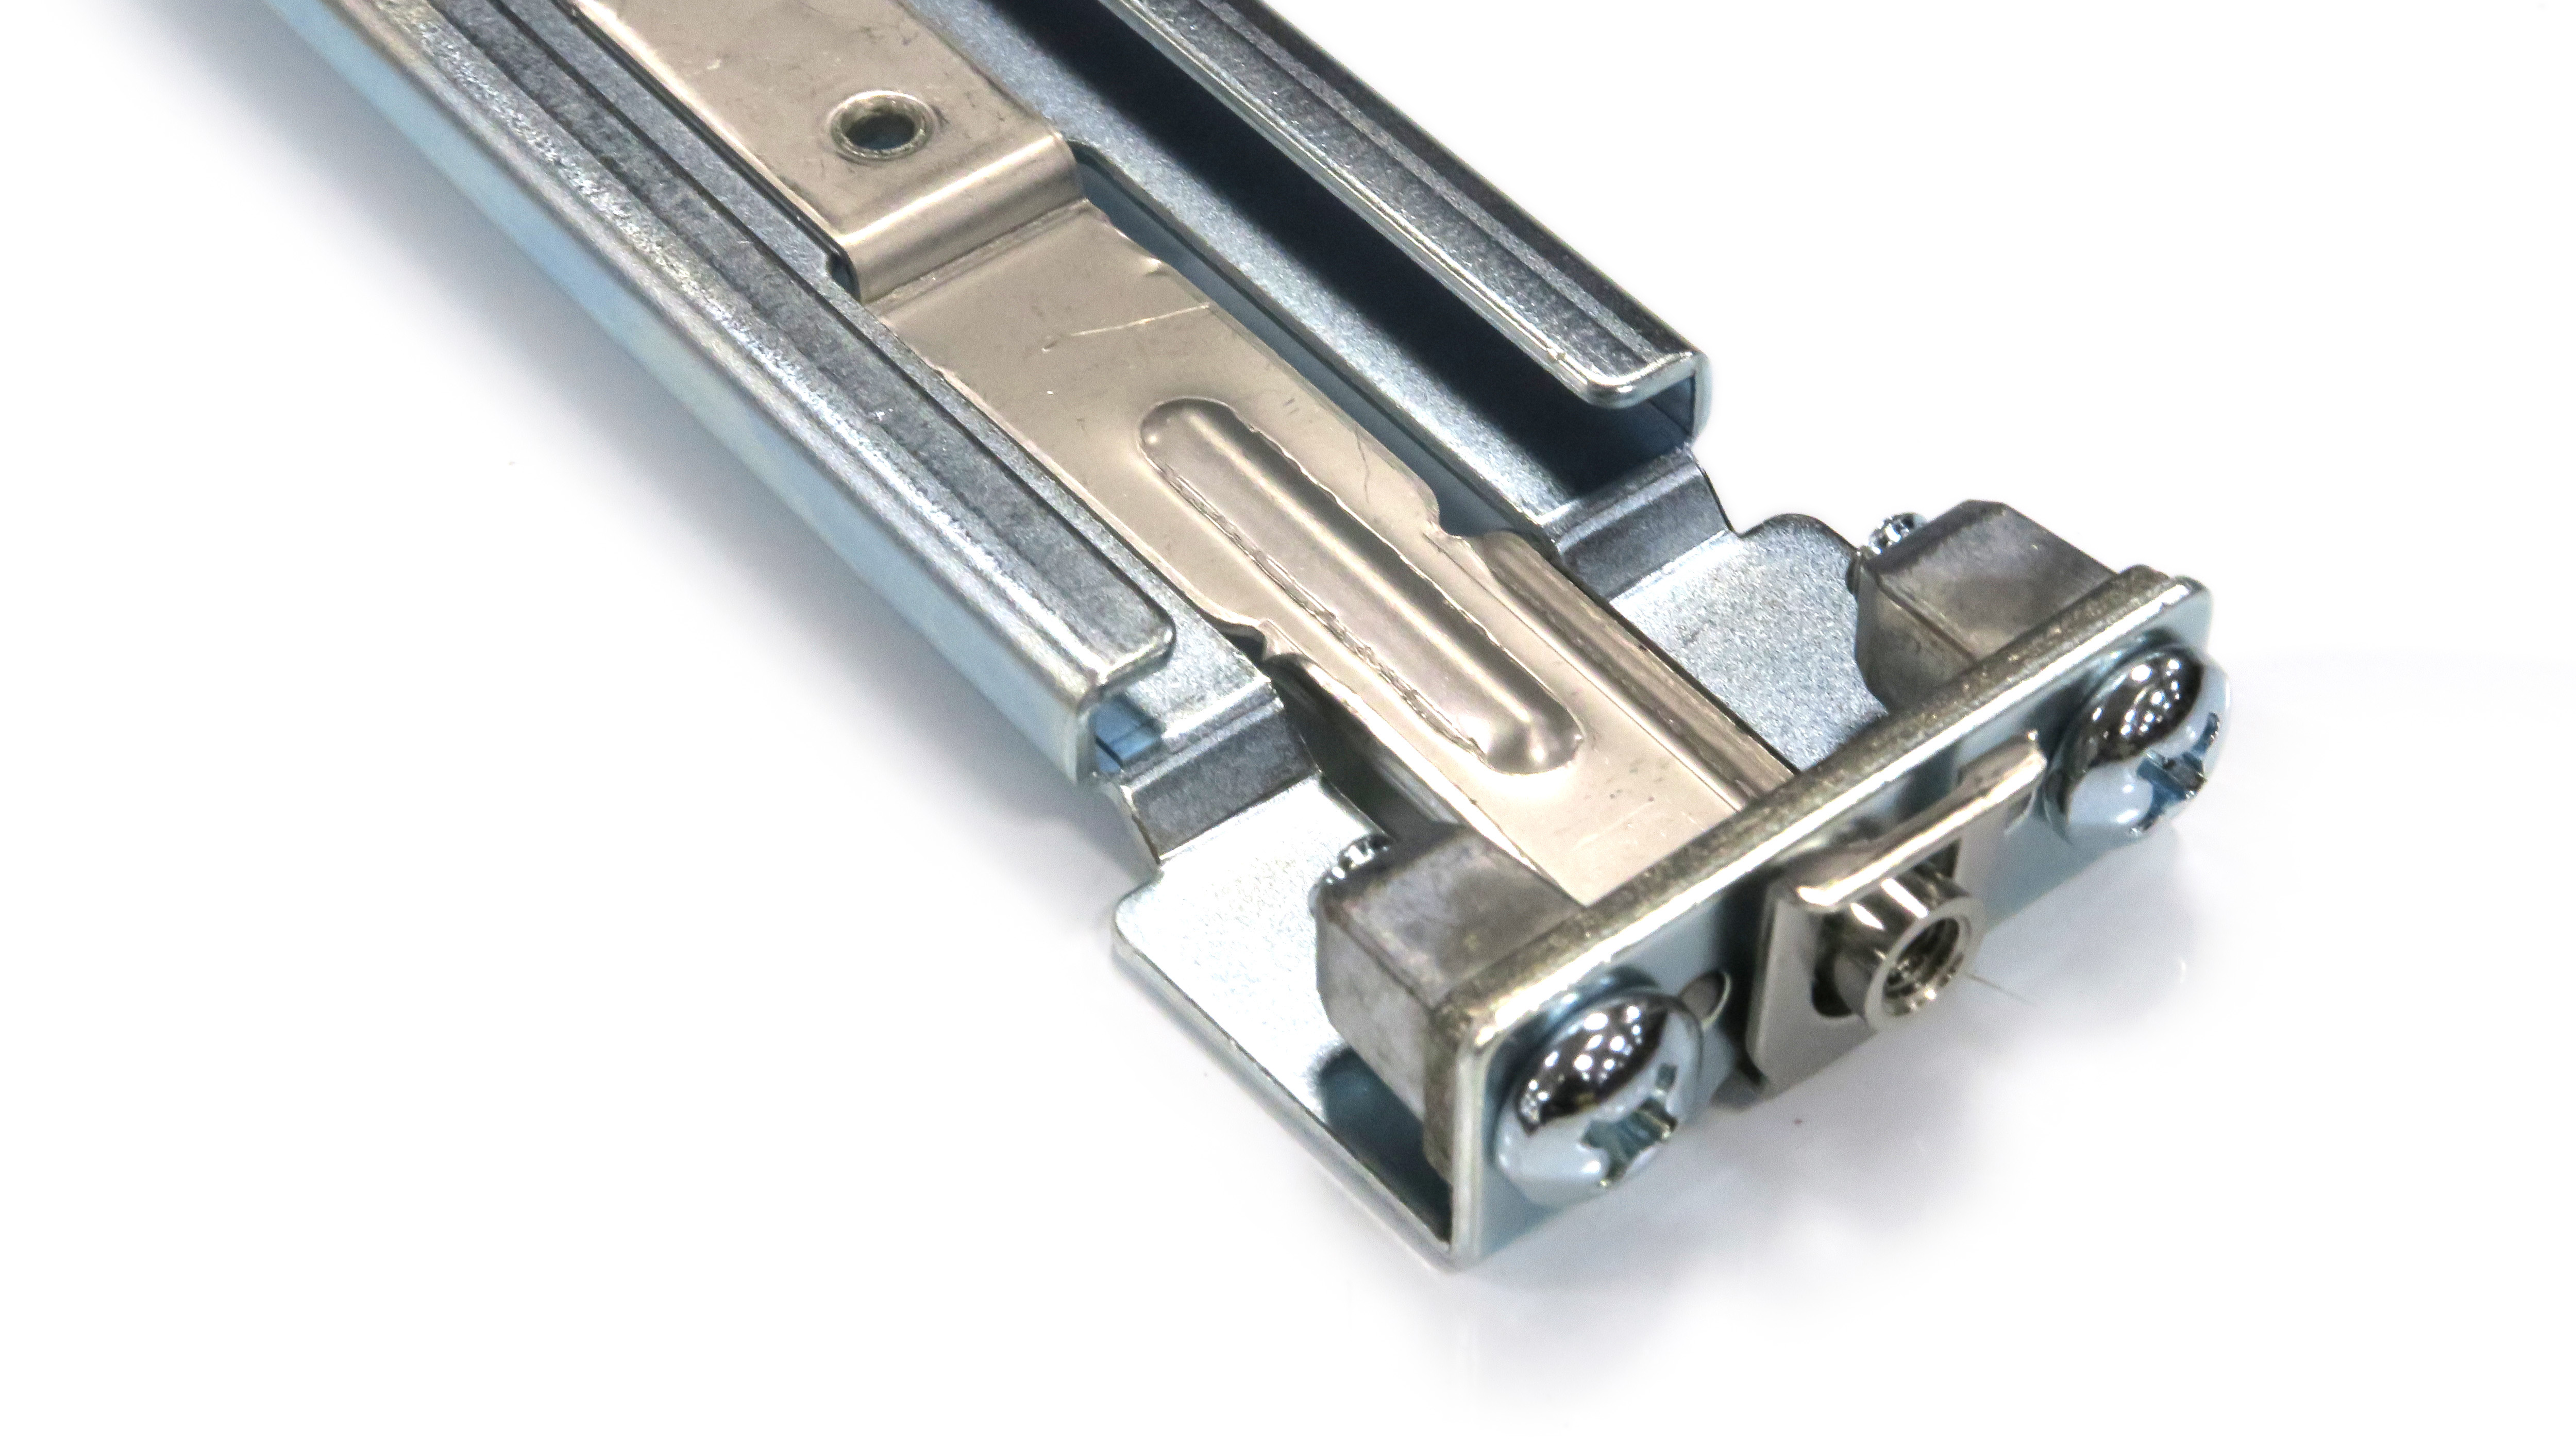 Closeup of a 7280R rail that attaches to the networking cabinet